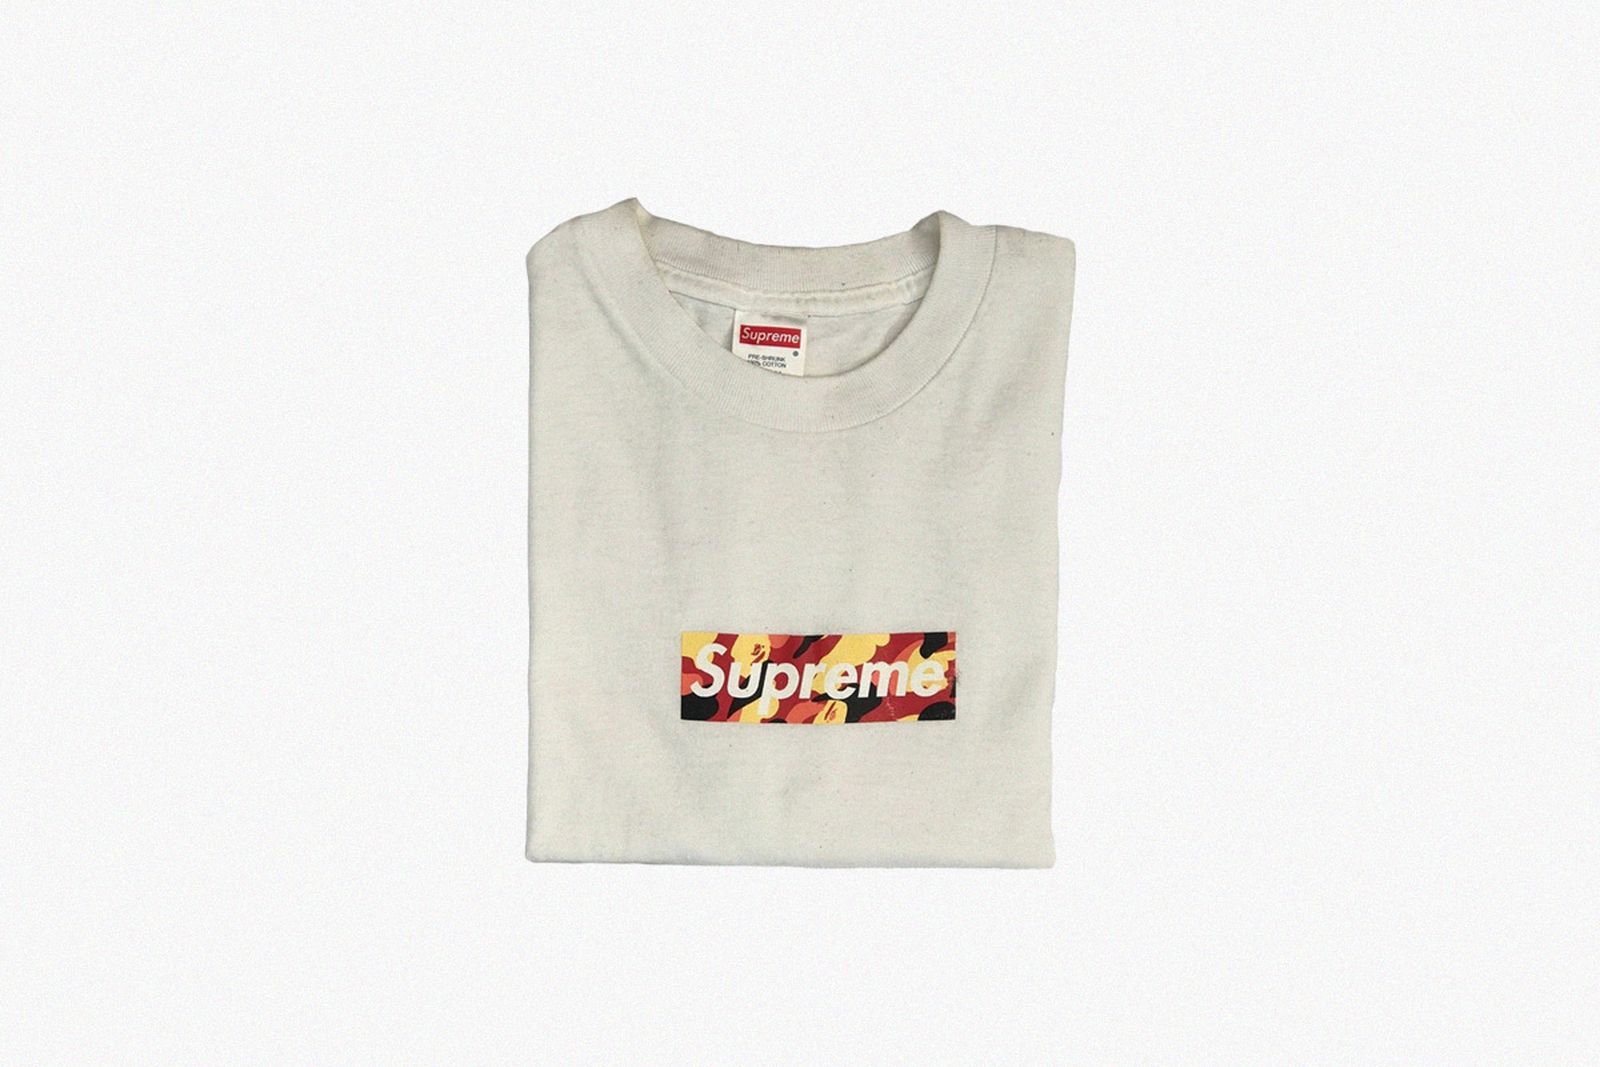 every-clothing-brand-supreme-ever-collaborated-6